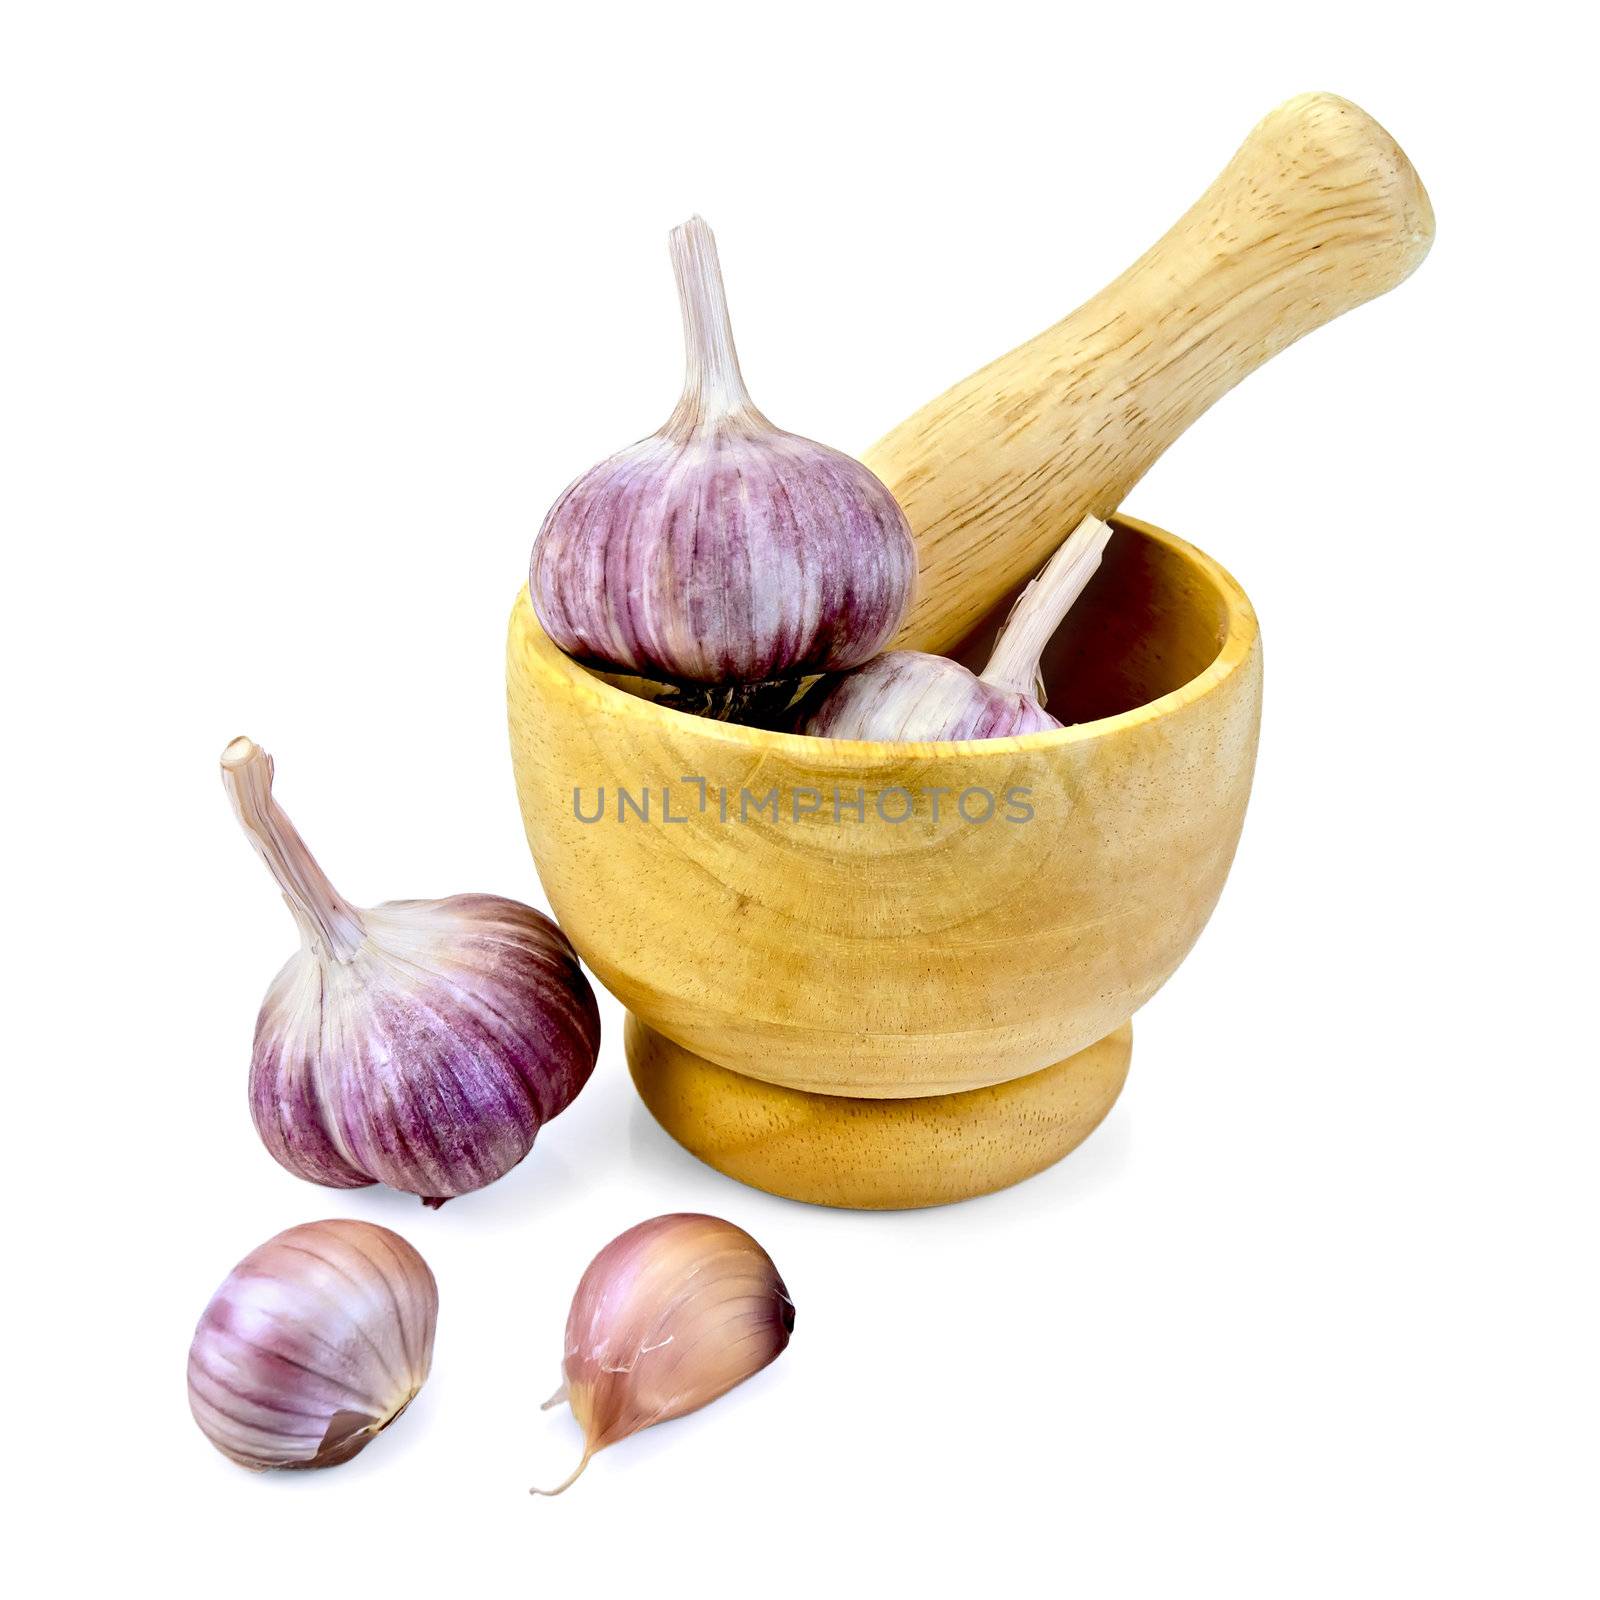 Whole and cloves of garlic bulbs in a wooden mortar and on the table isolated on white background